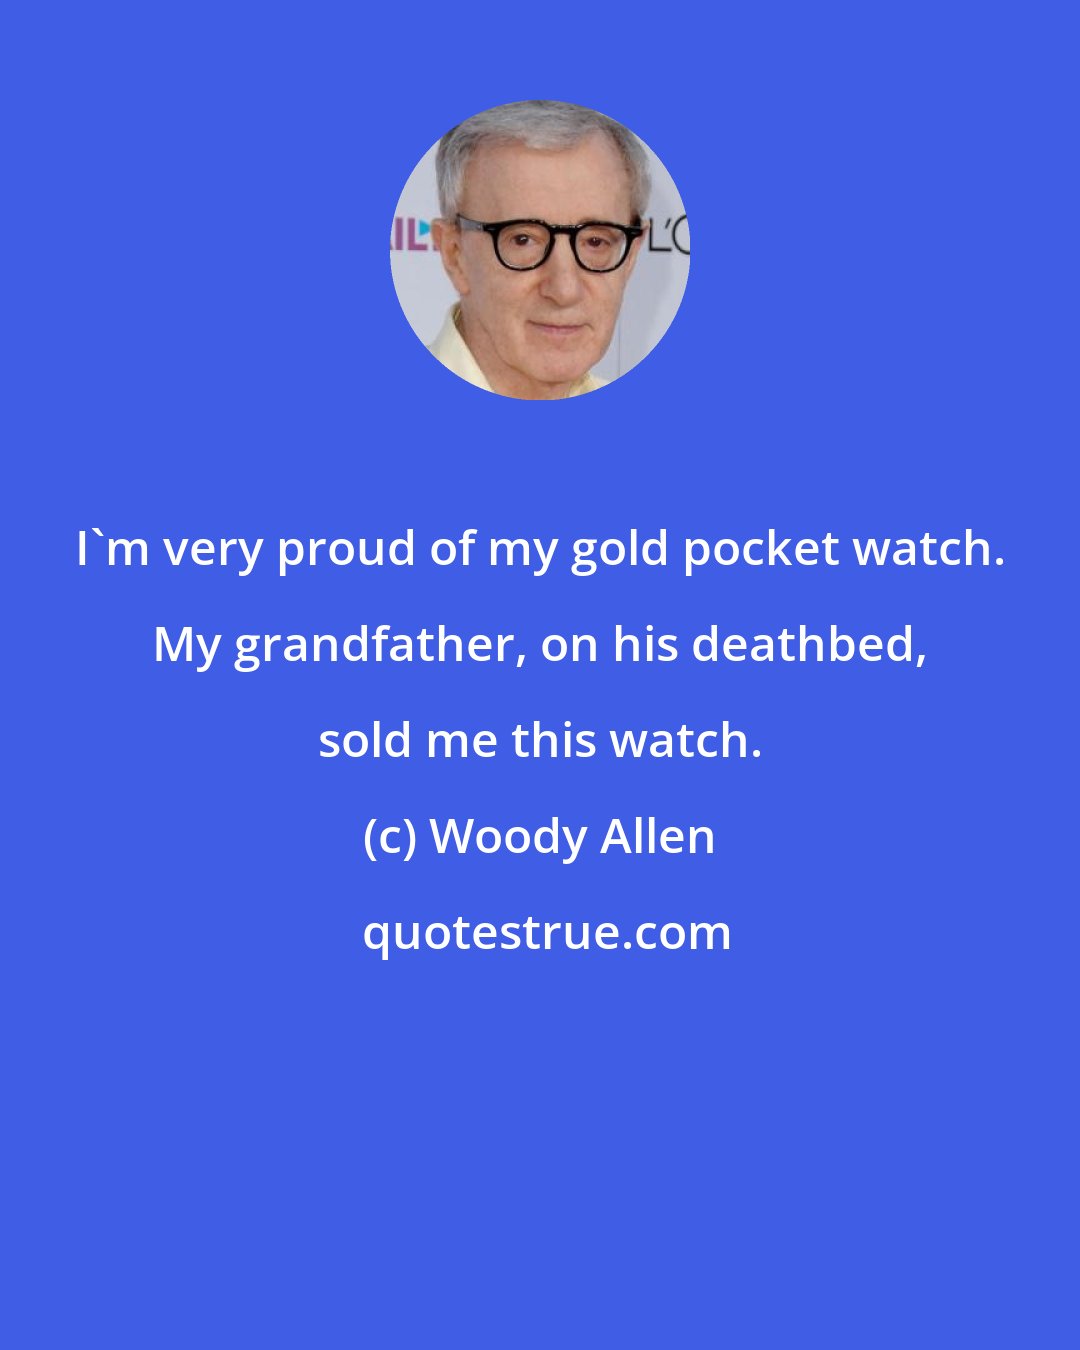 Woody Allen: I'm very proud of my gold pocket watch. My grandfather, on his deathbed, sold me this watch.